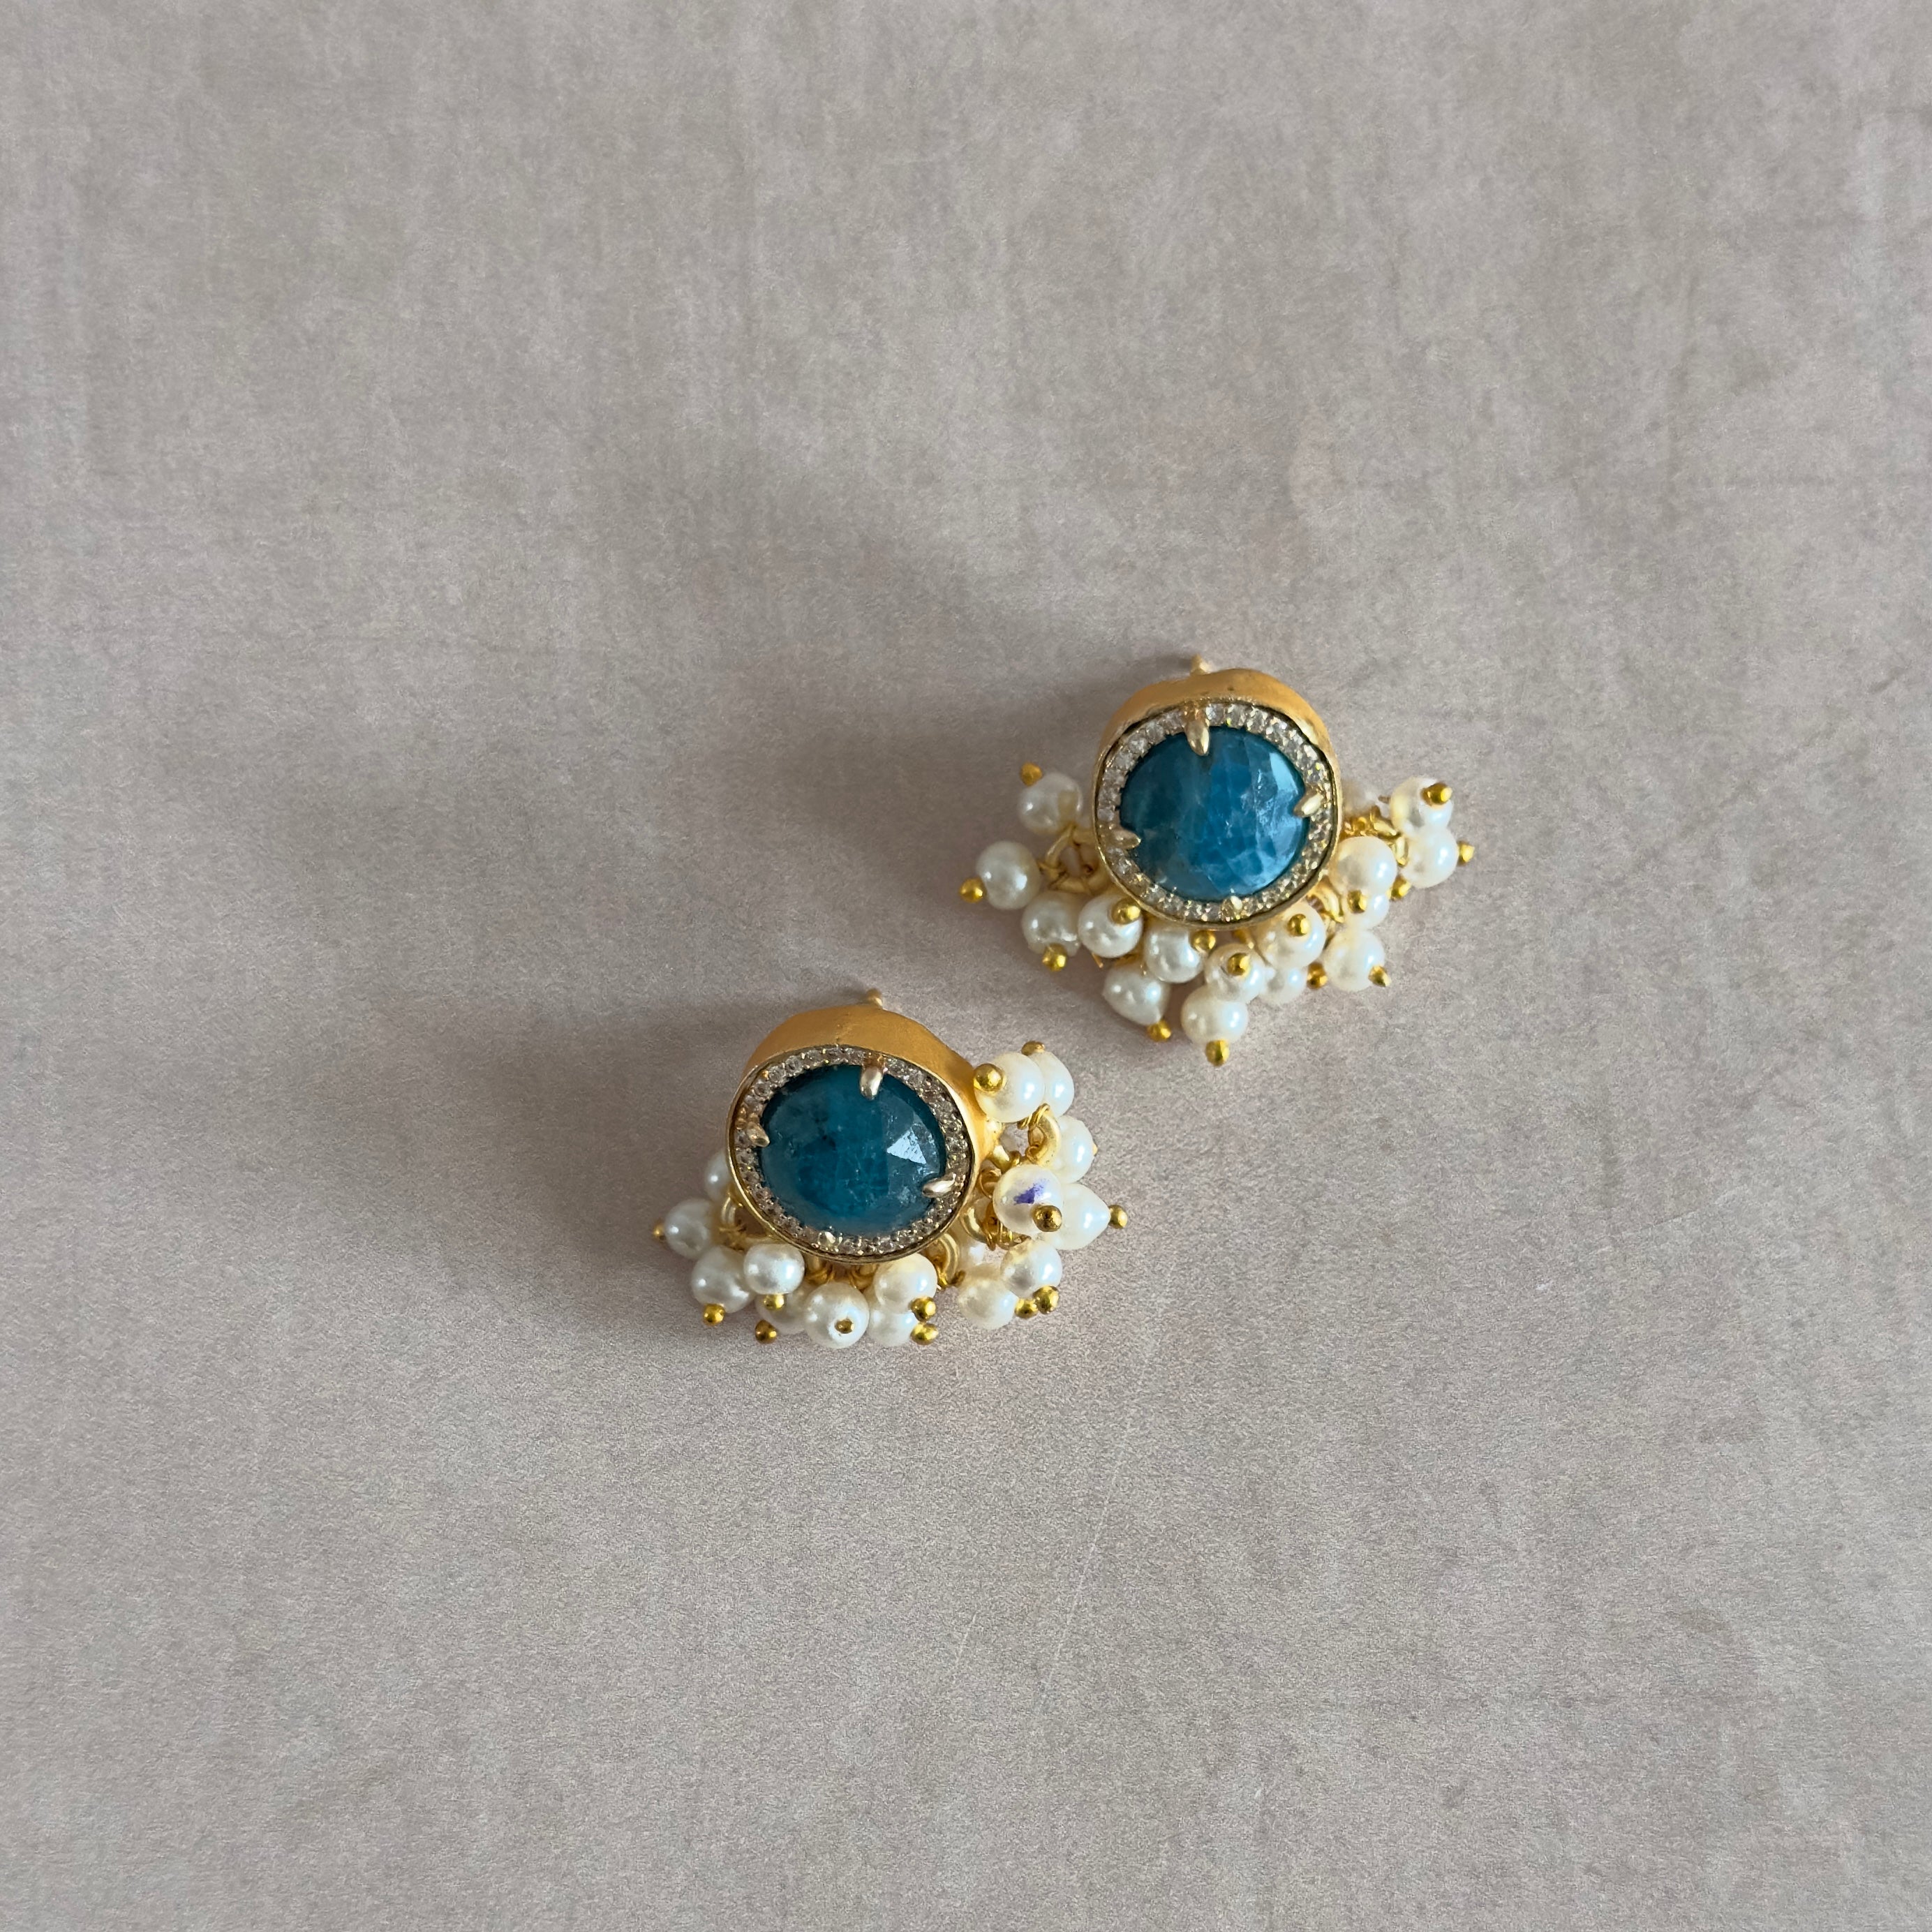 Elevate your style with our Indi Teal Stud Earrings. These earrings feature a classic stud design that adds timeless elegance to any outfit. Make a statement with confidence and sophistication.